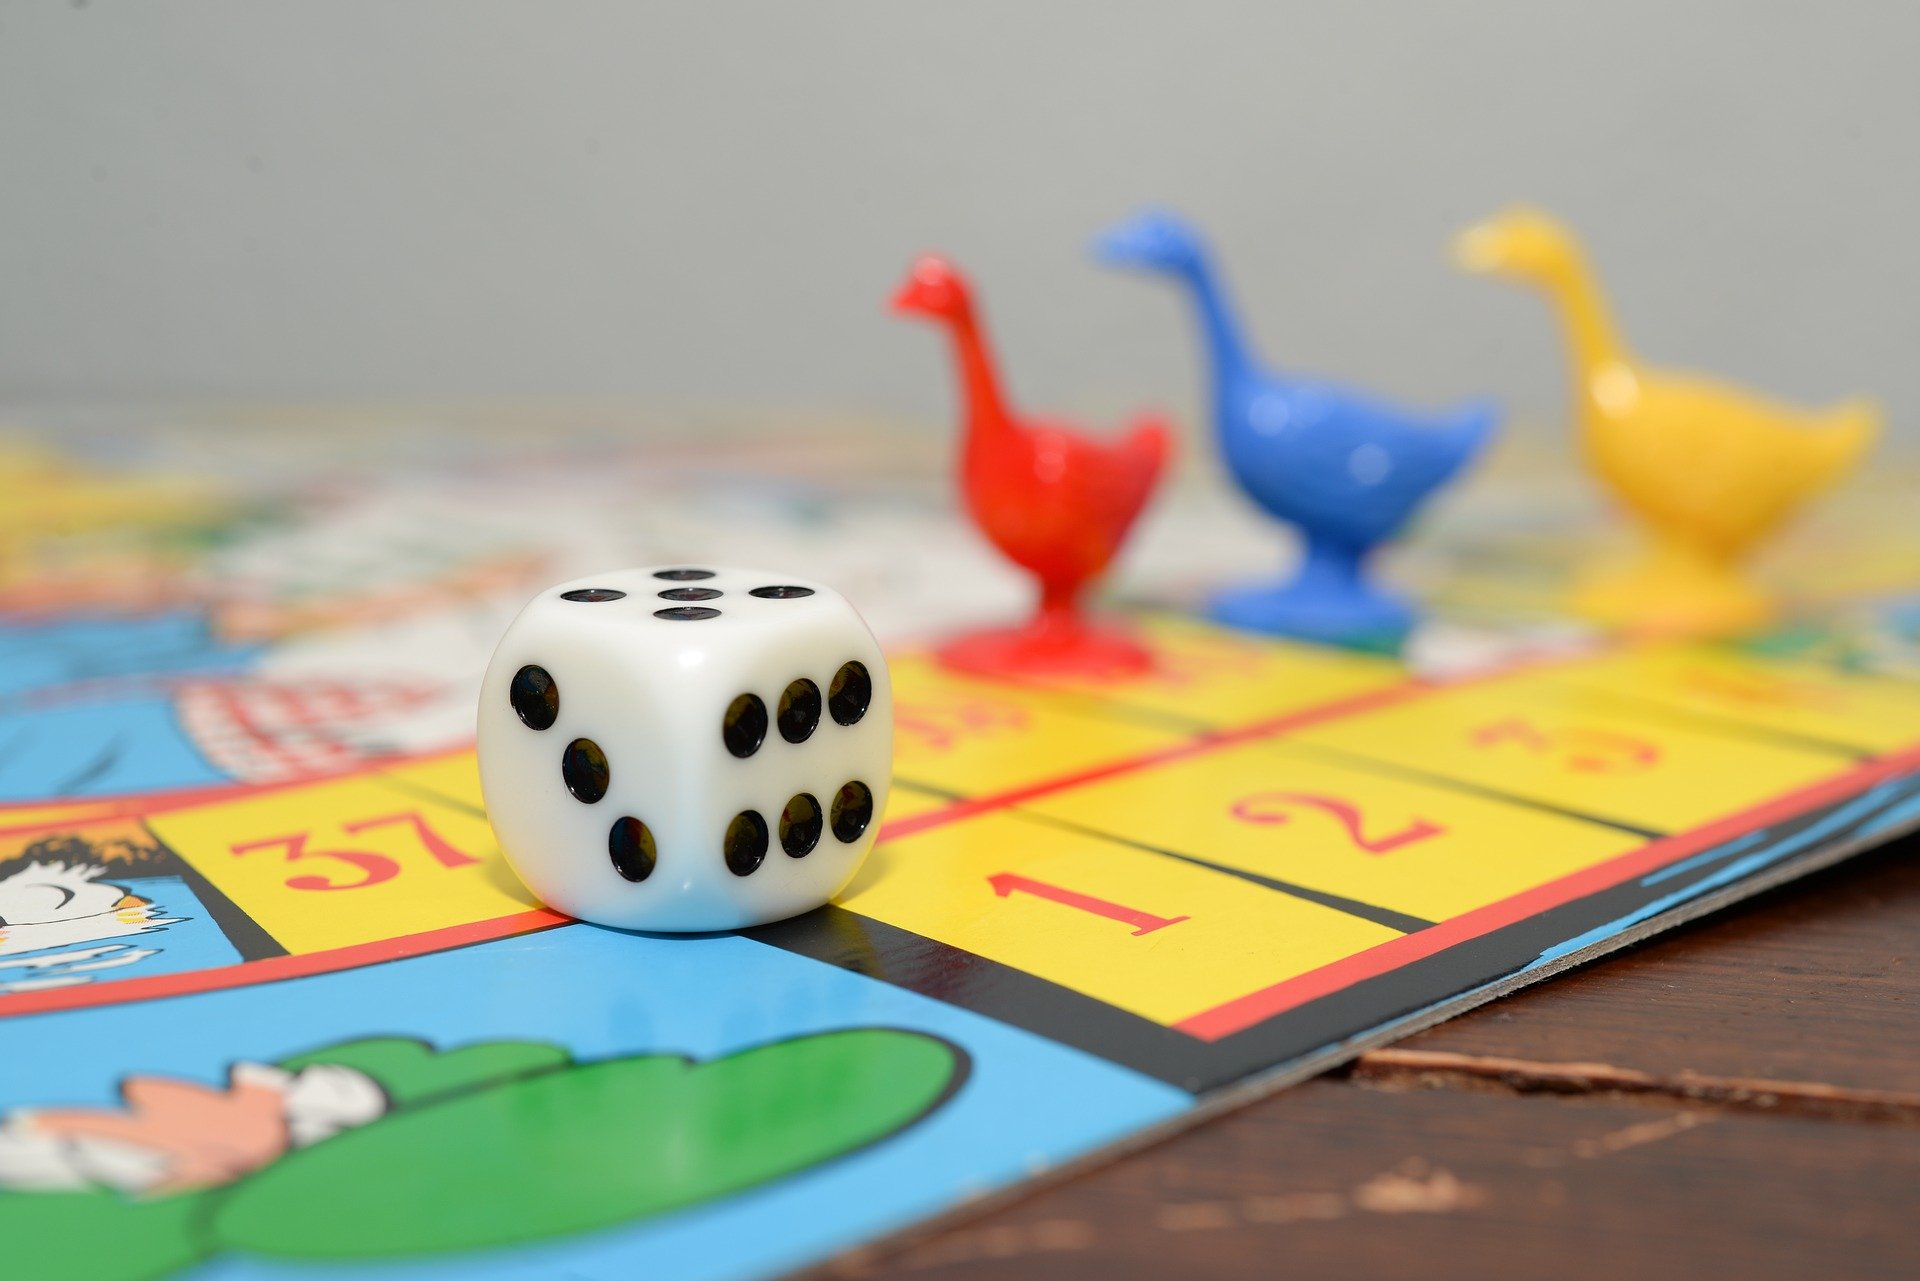 Has Your Favourite Board Game Made This Top Ten?